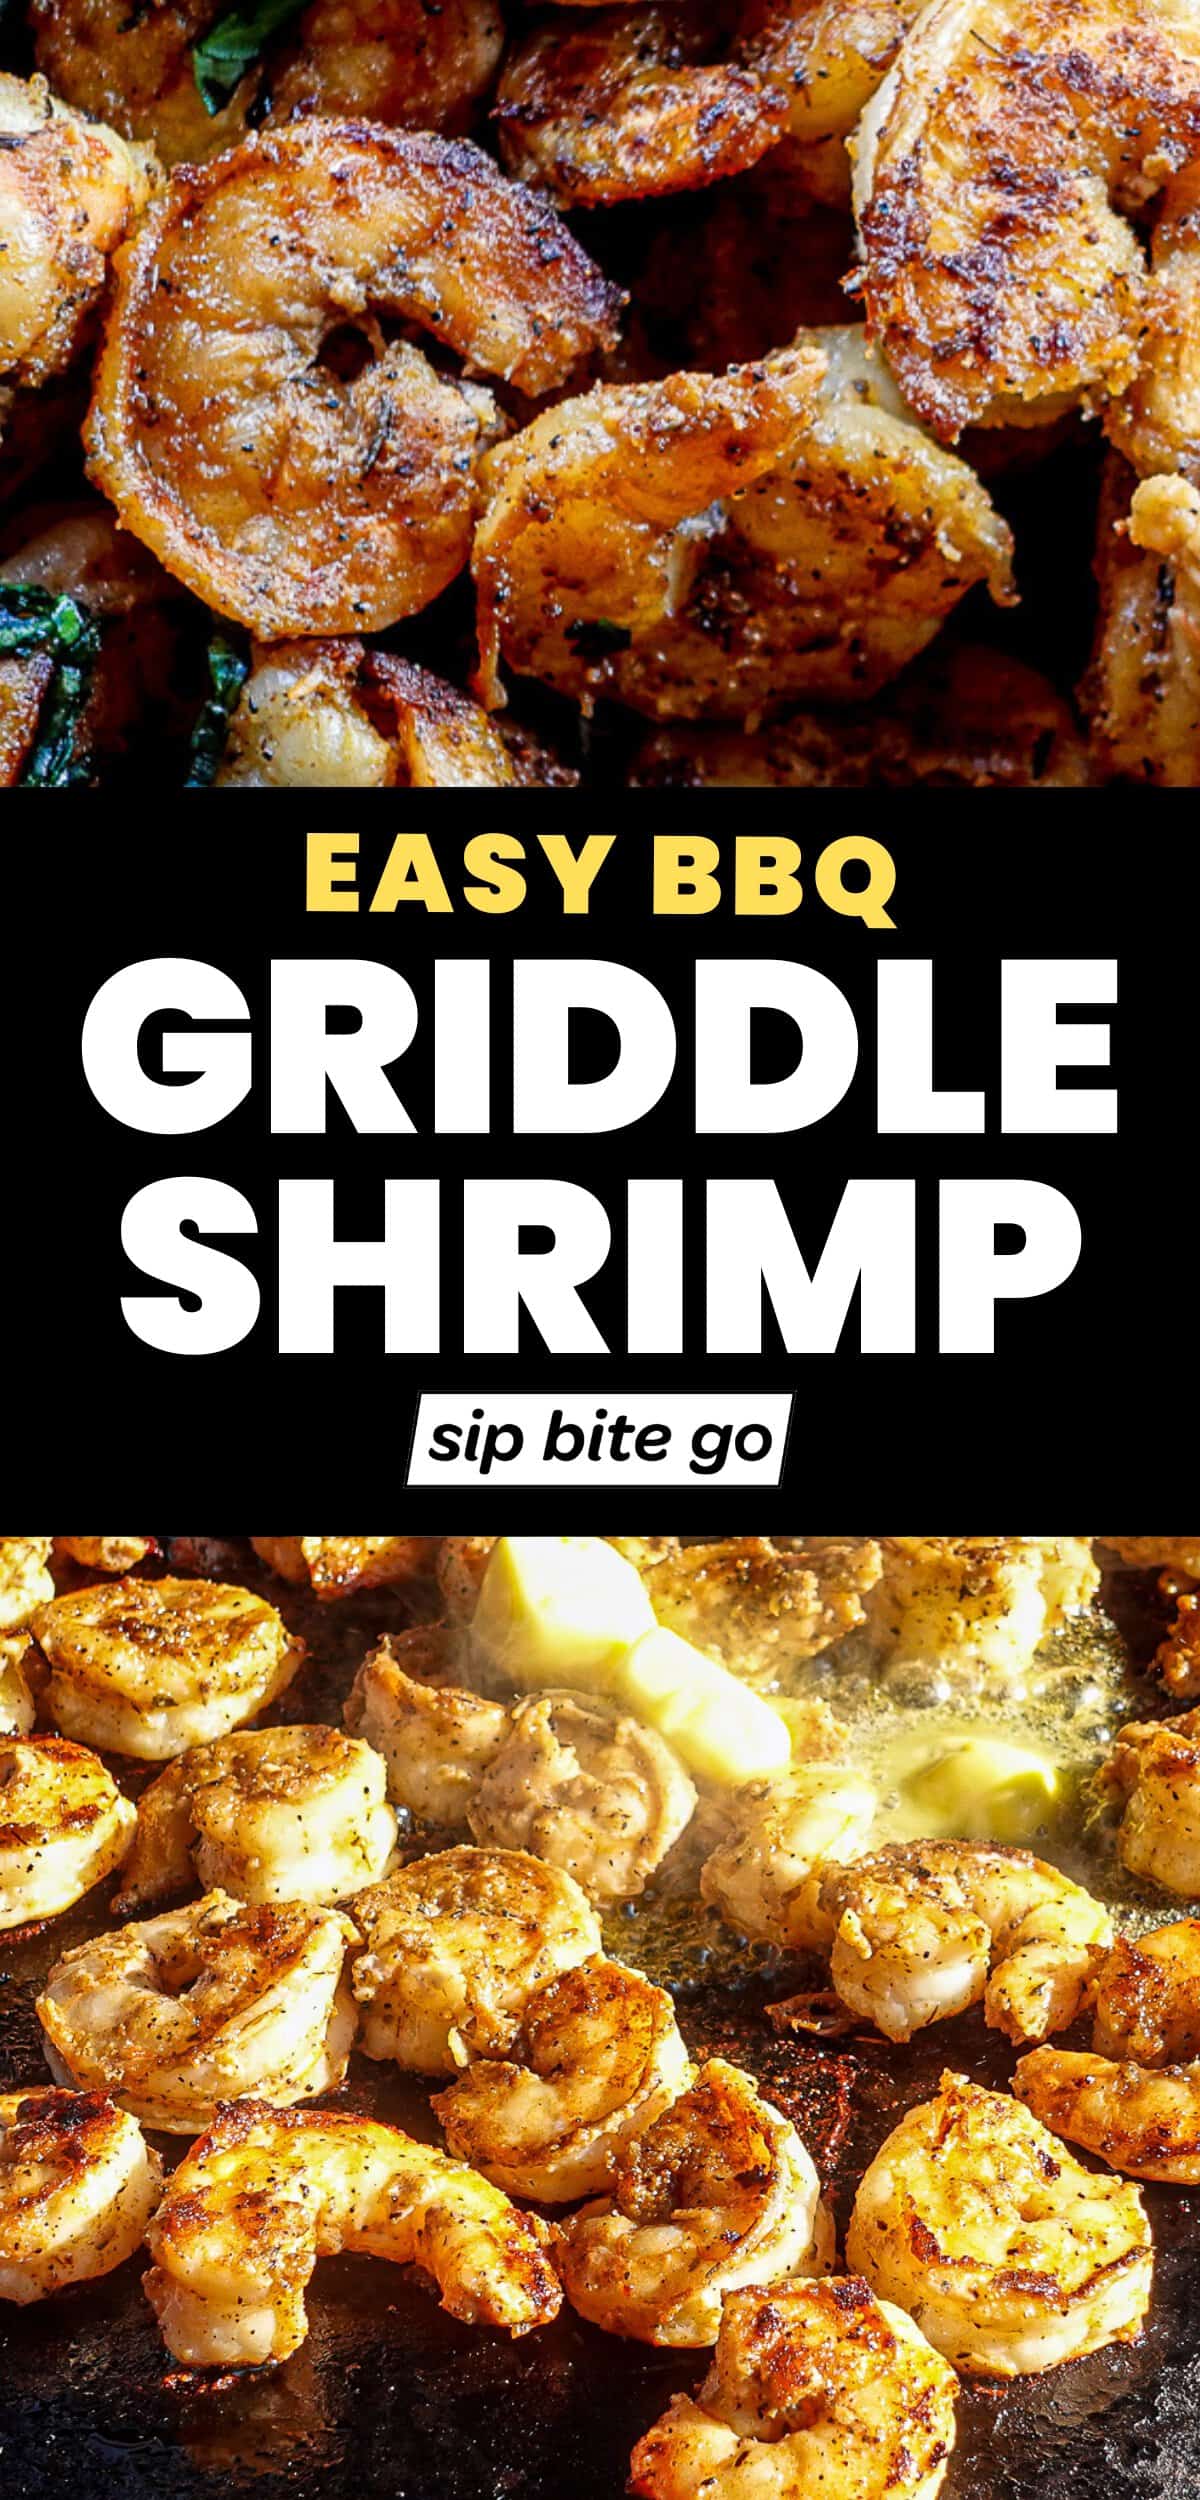 How To Griddle Shrimp Recipe before and after